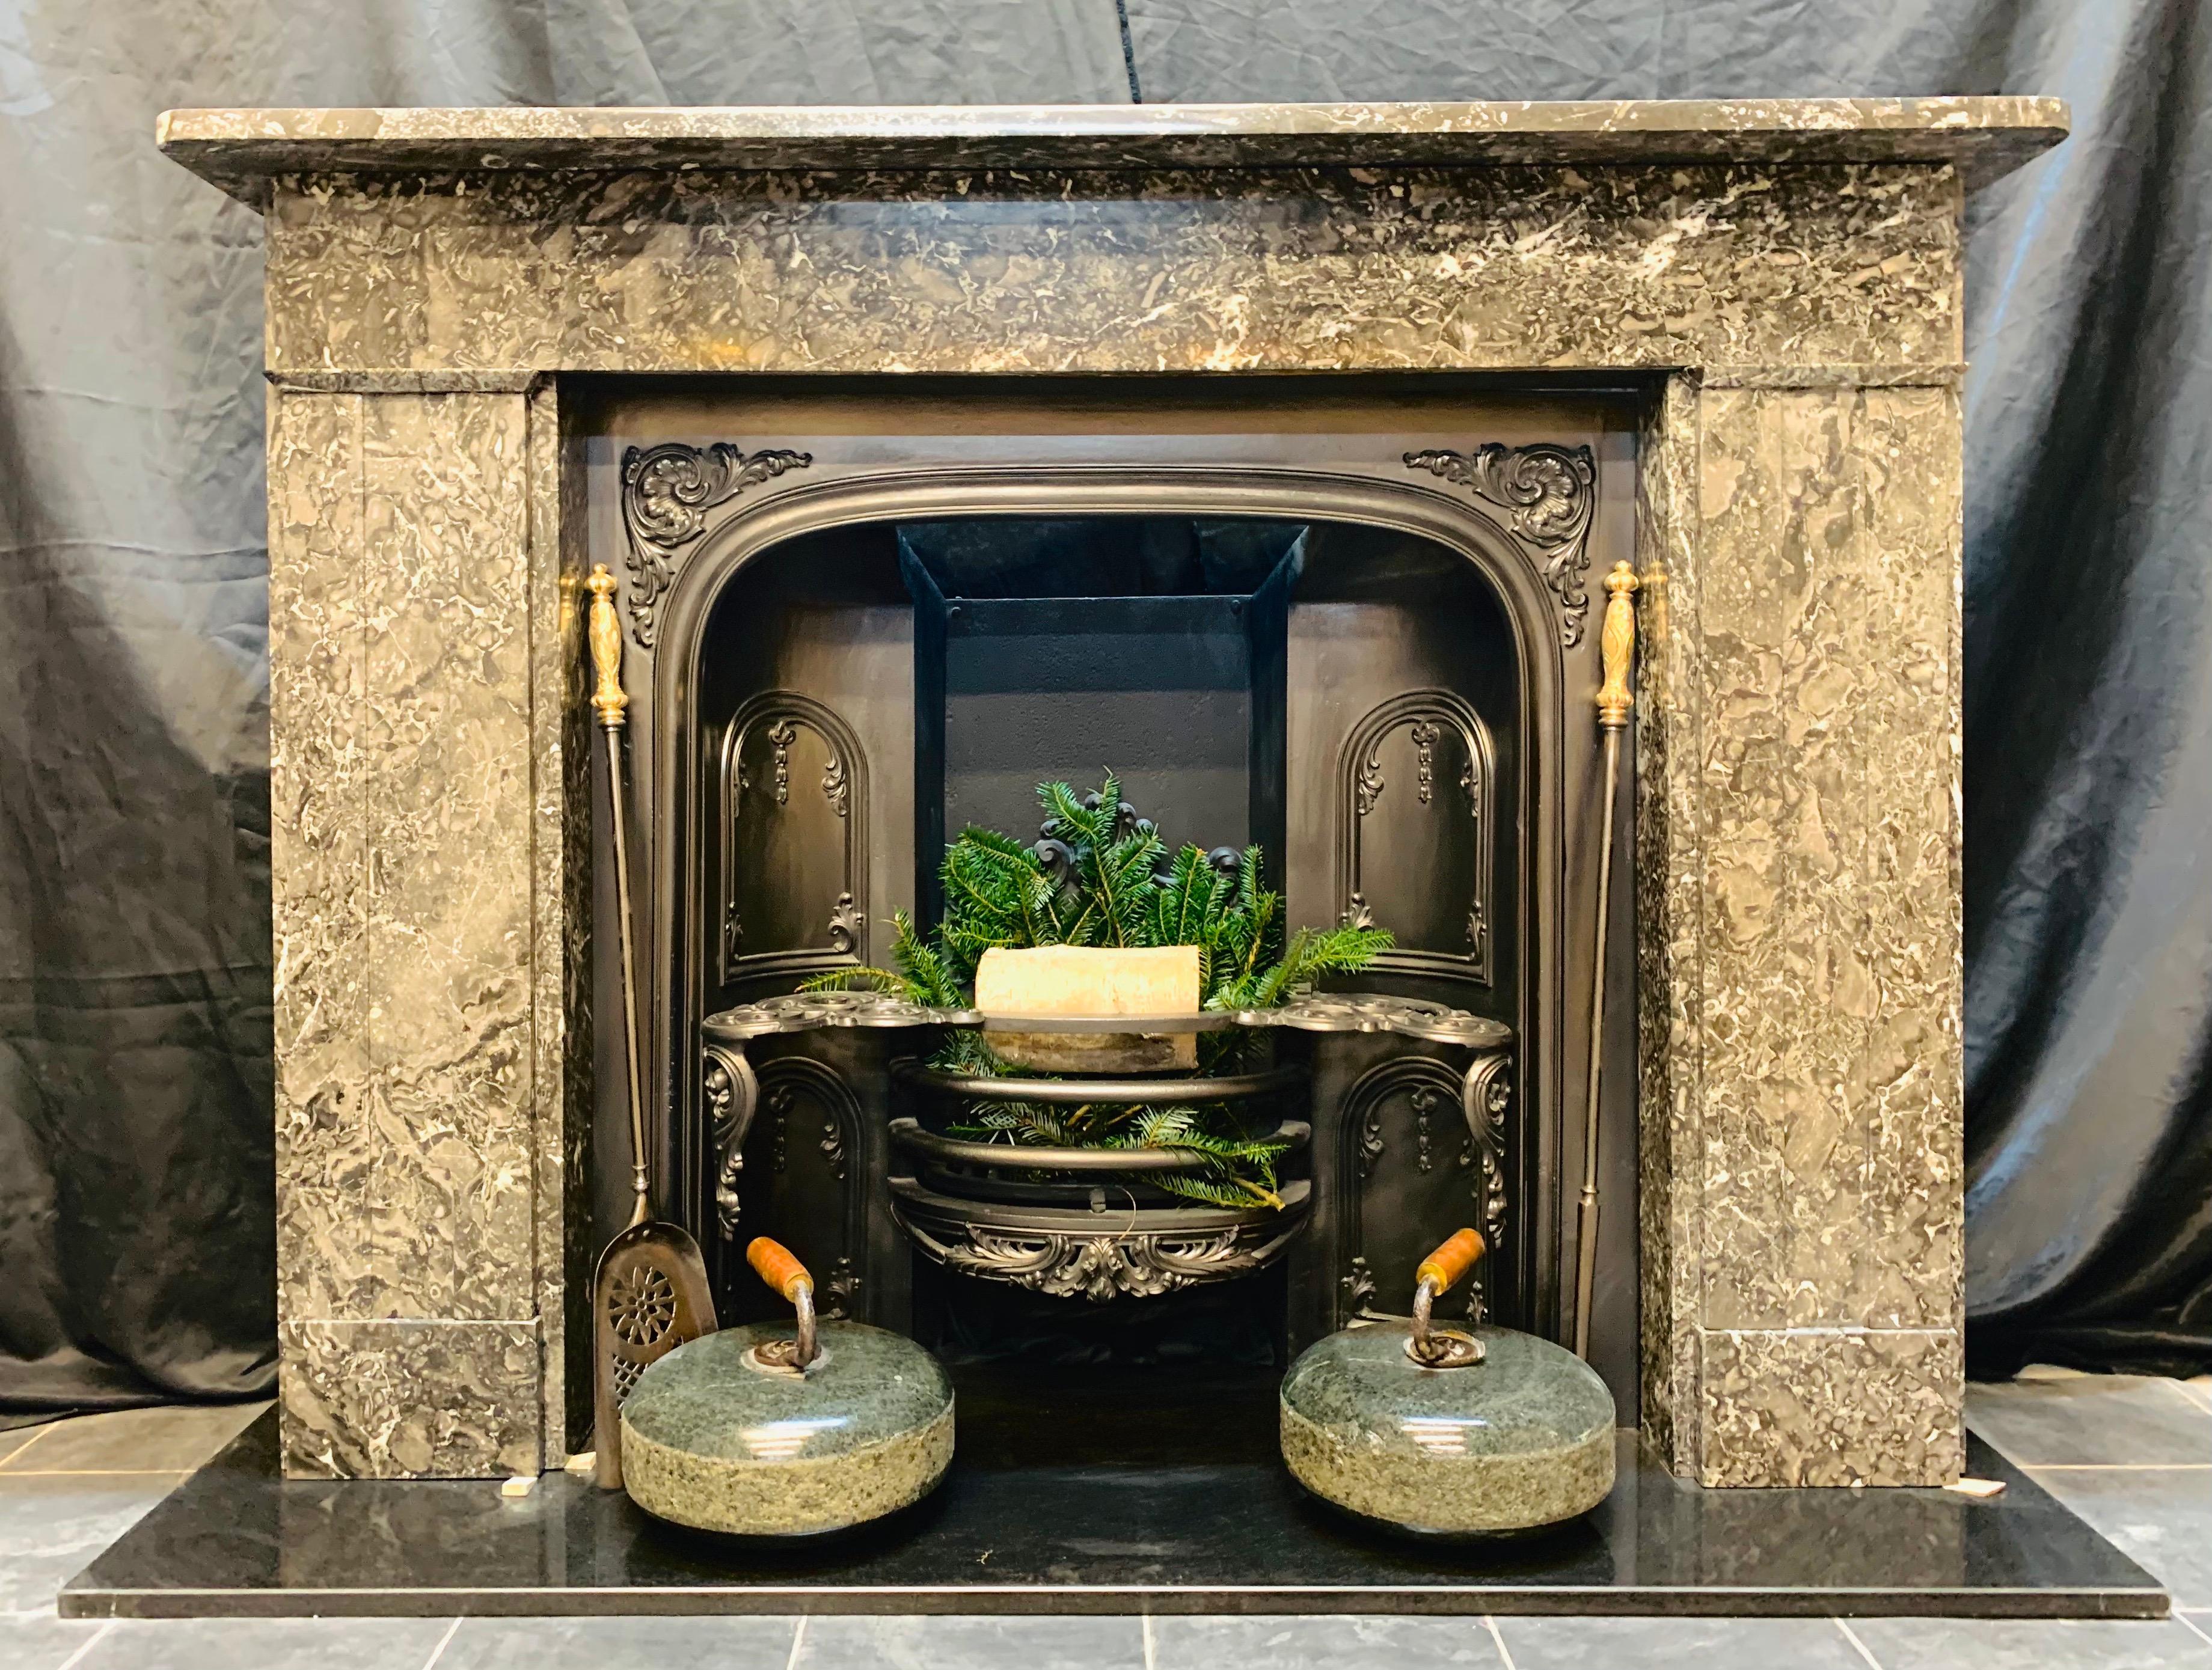 A splendid Scottish (Edinburgh) early 19th century Georgian Ashburton marble fireplace surround. Ashburton marble was mined in Devon, it has a distinctive pattern and shows various colours, this example is mottled, or variegated Ashburton, A